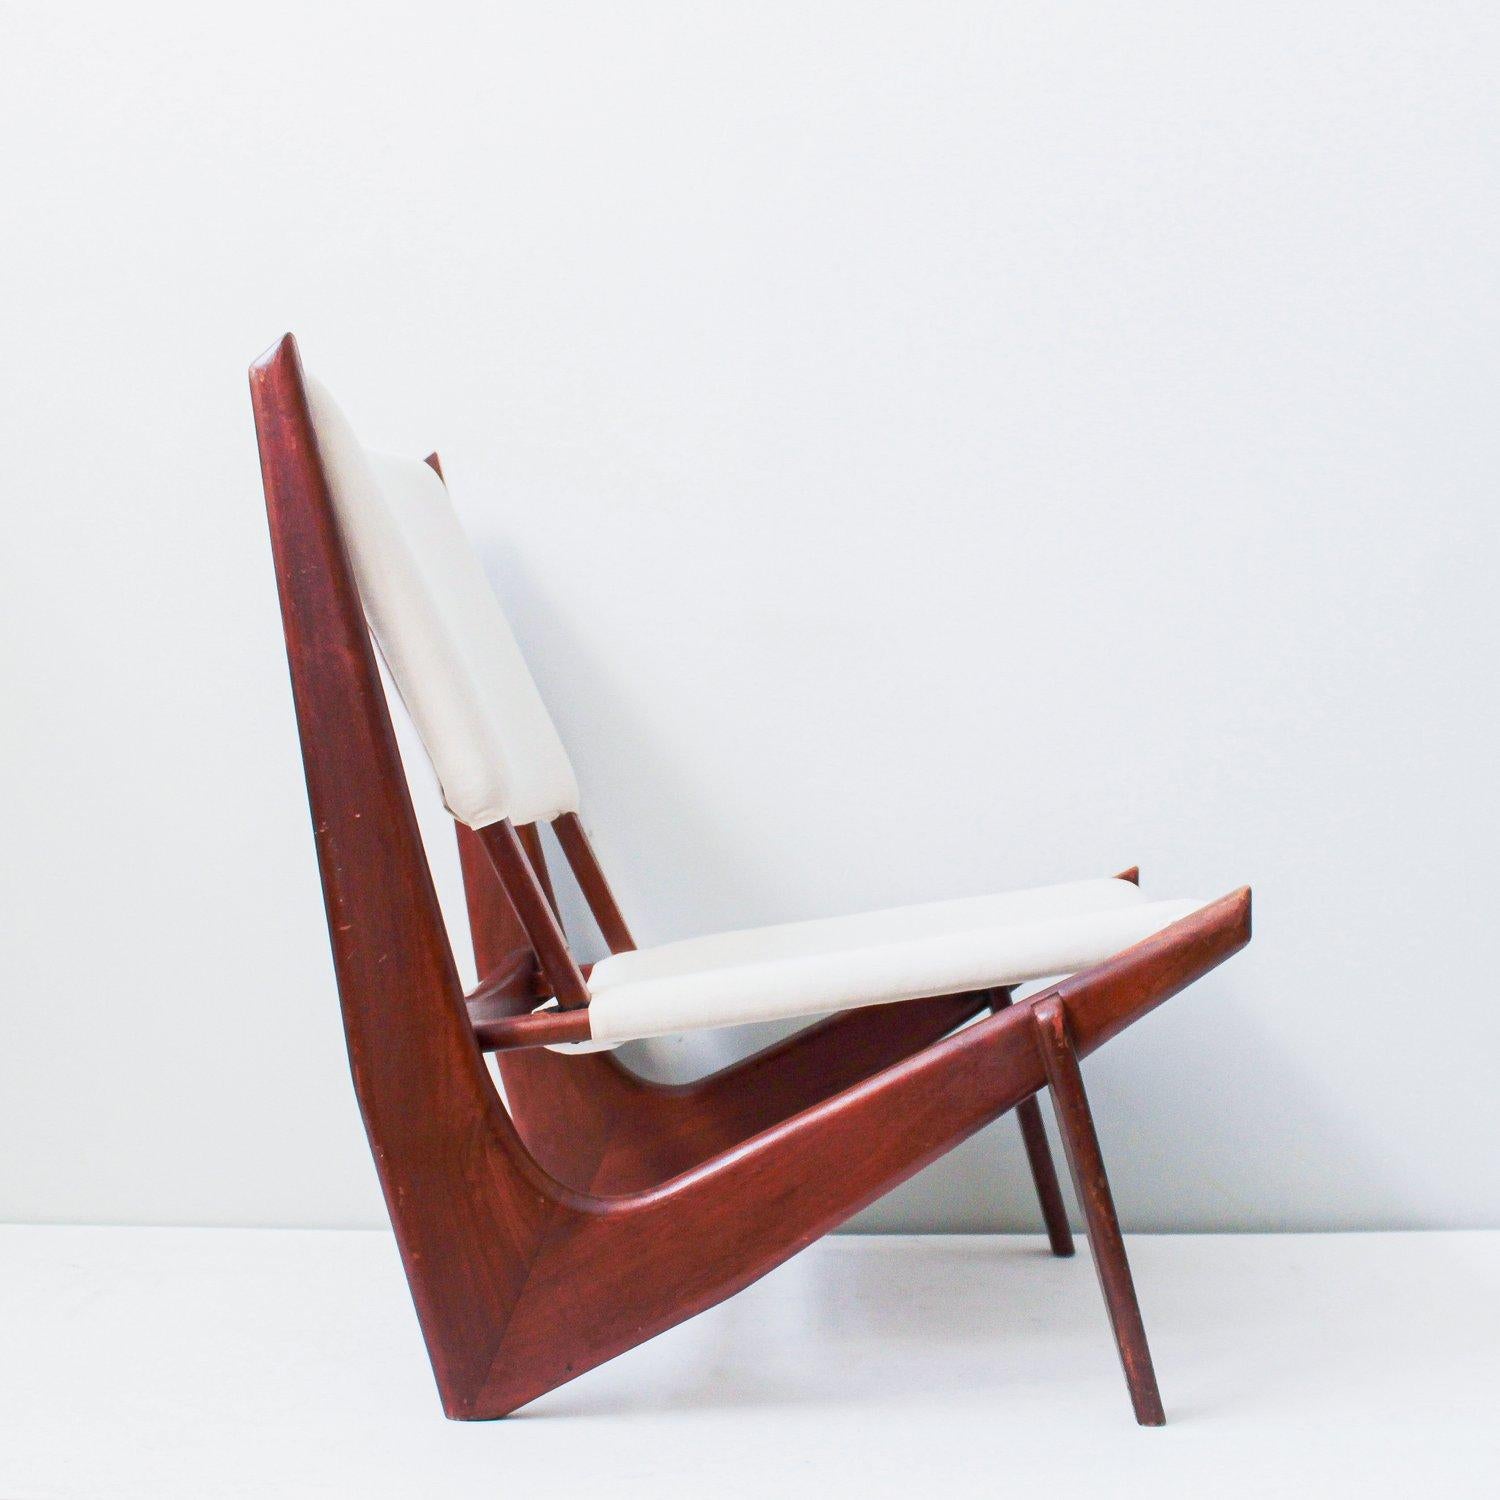 Easy chair designed by Bertil V. Behrman for AB Engens Fabriker. The model name is 233 and comes from the 